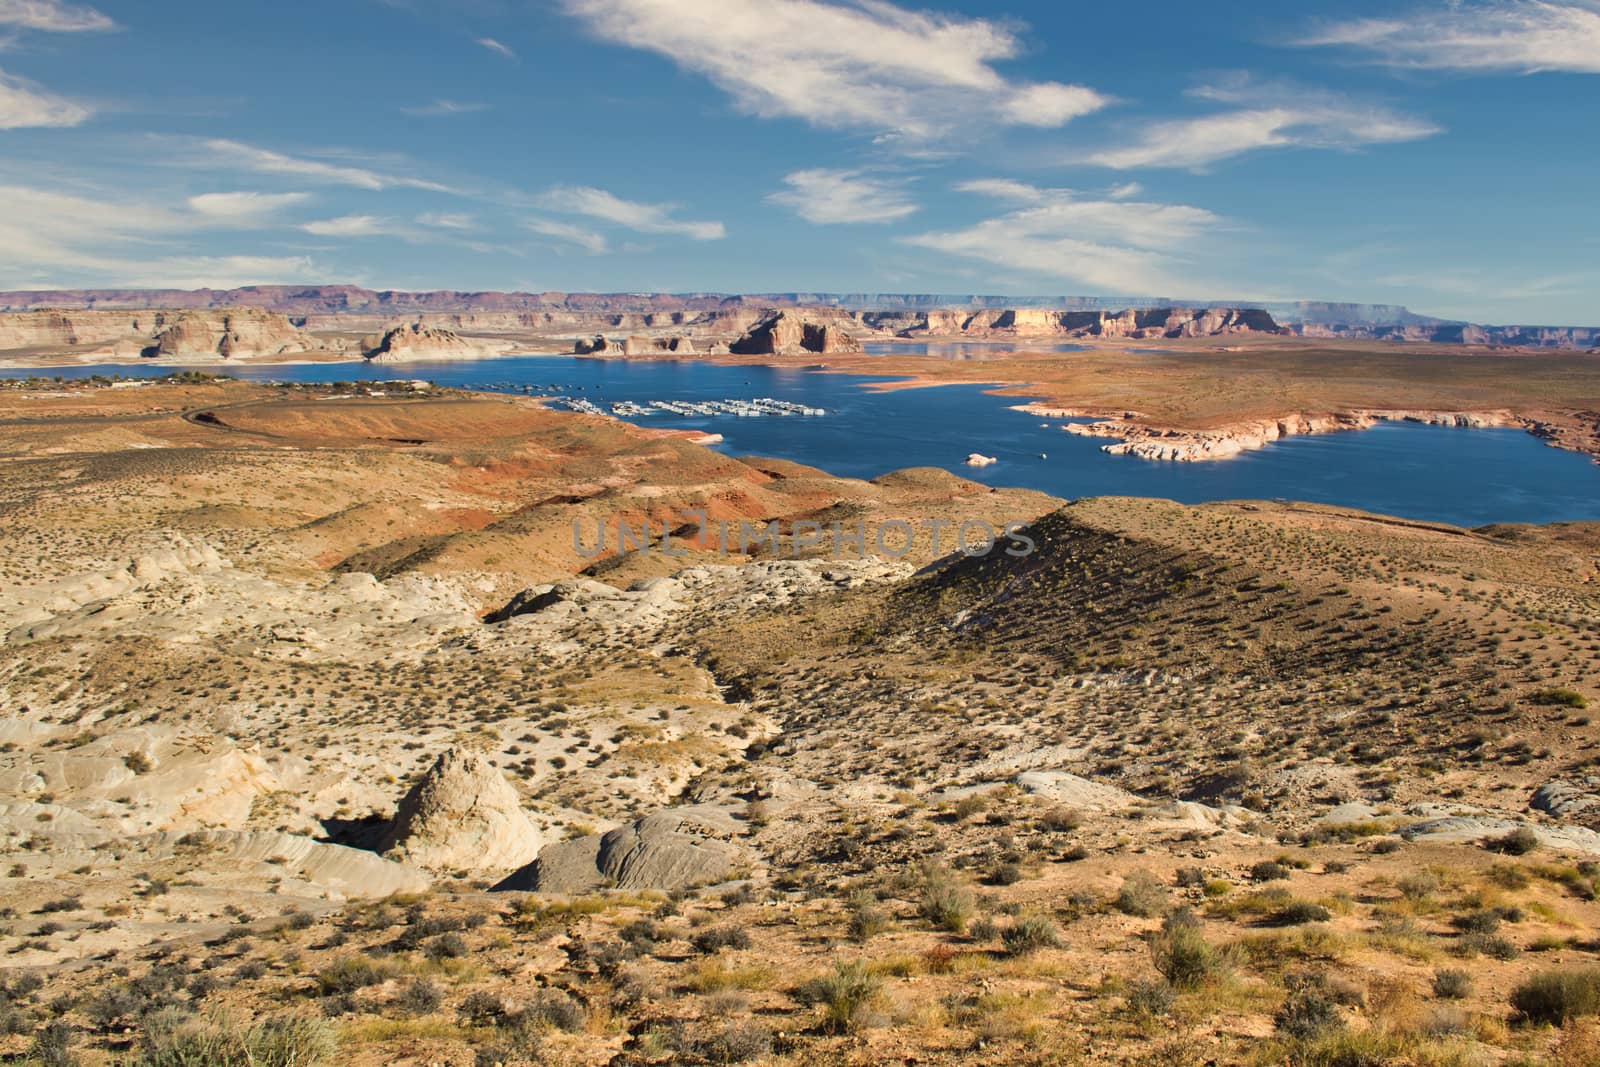 View on lake powell in Arizona. Travel and tourism in USA